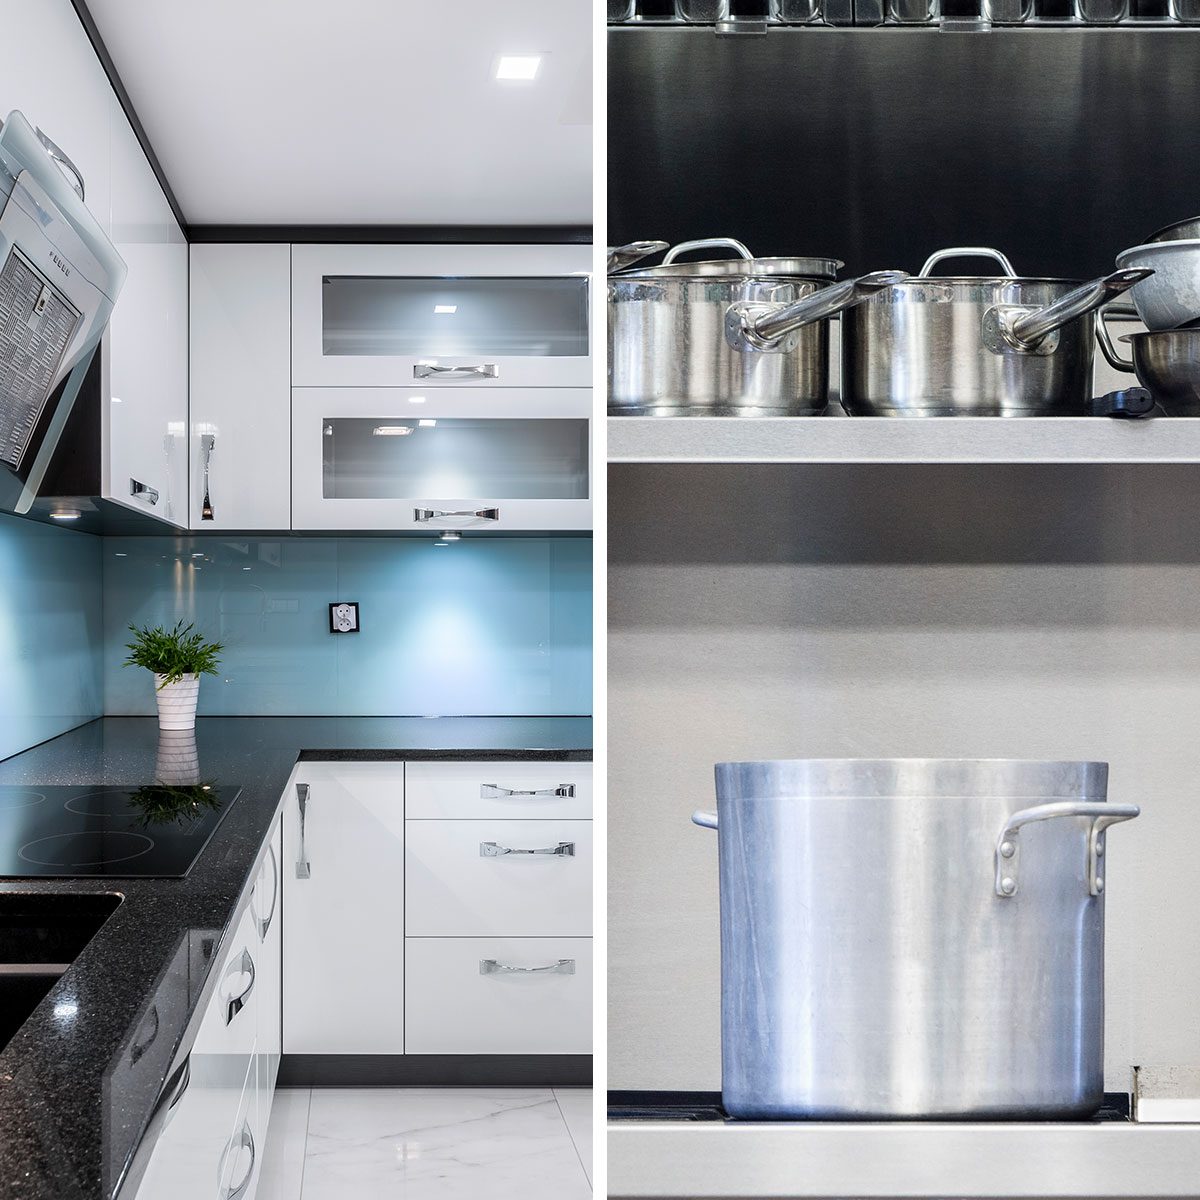 Inspiration From Kitchens With Stainless Steel Backsplashes